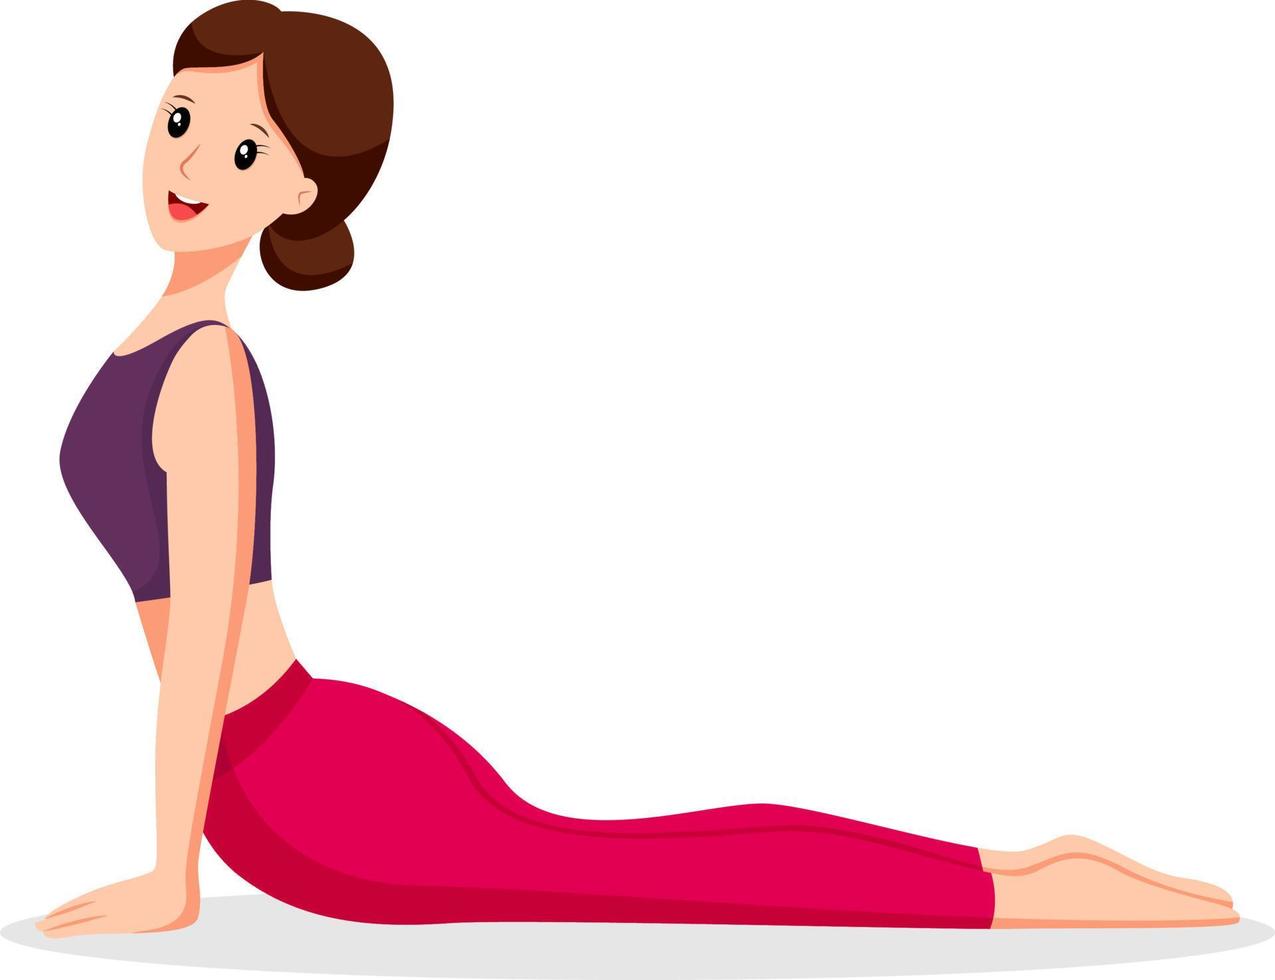 Young Woman Yoga Position Character Design Illustration vector